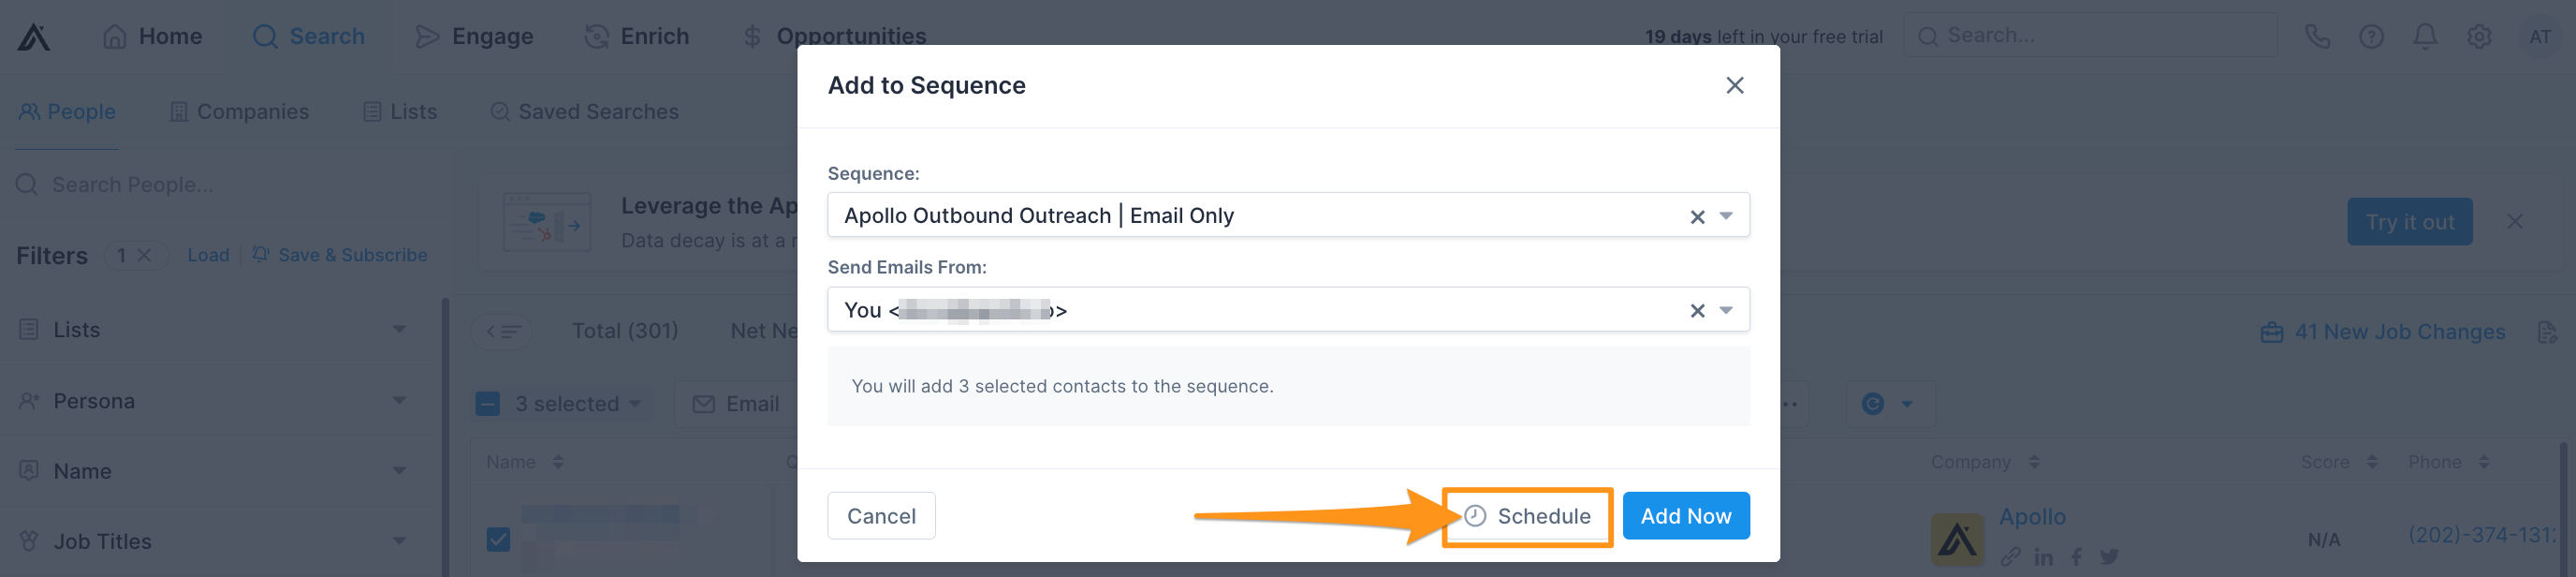 Scheduled time options in modal